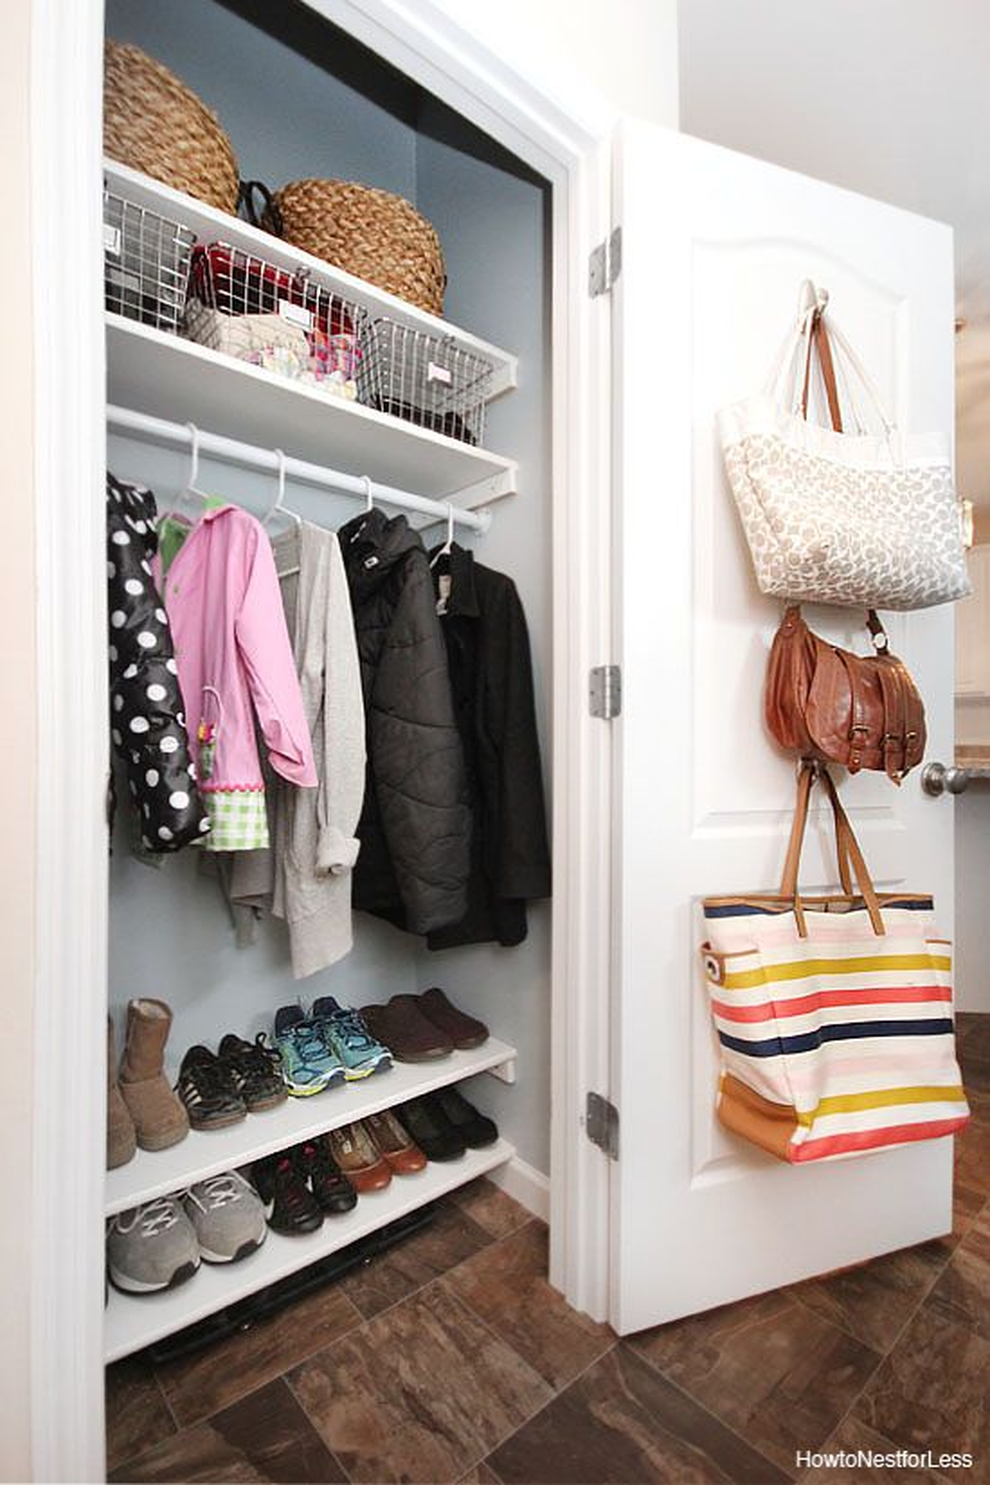 15 ideas to save space for small wardrobe - 11